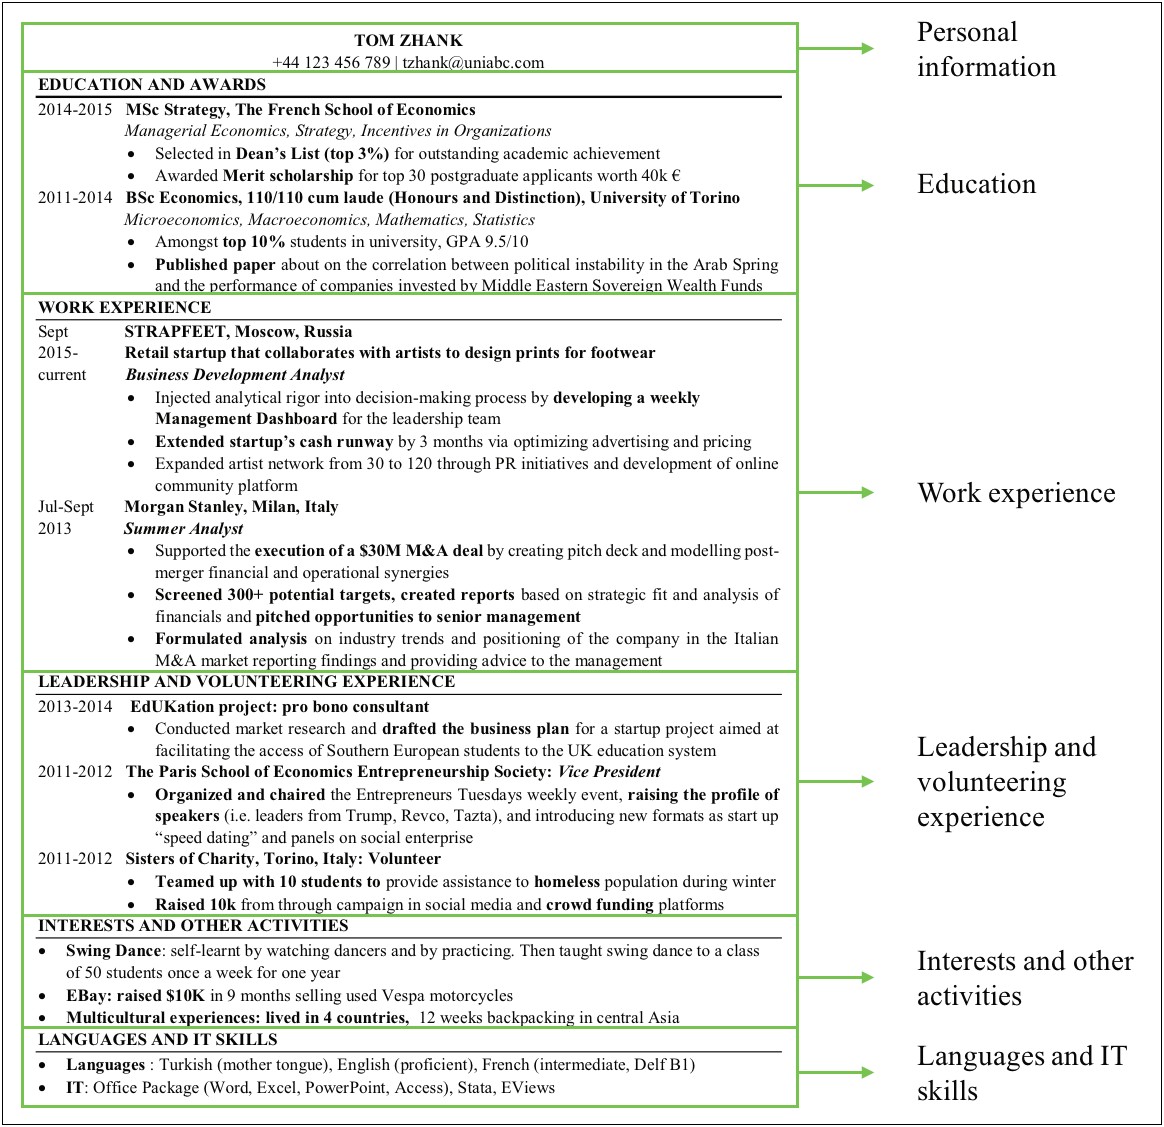 Sample Resumes For Apple Business Analyst Position